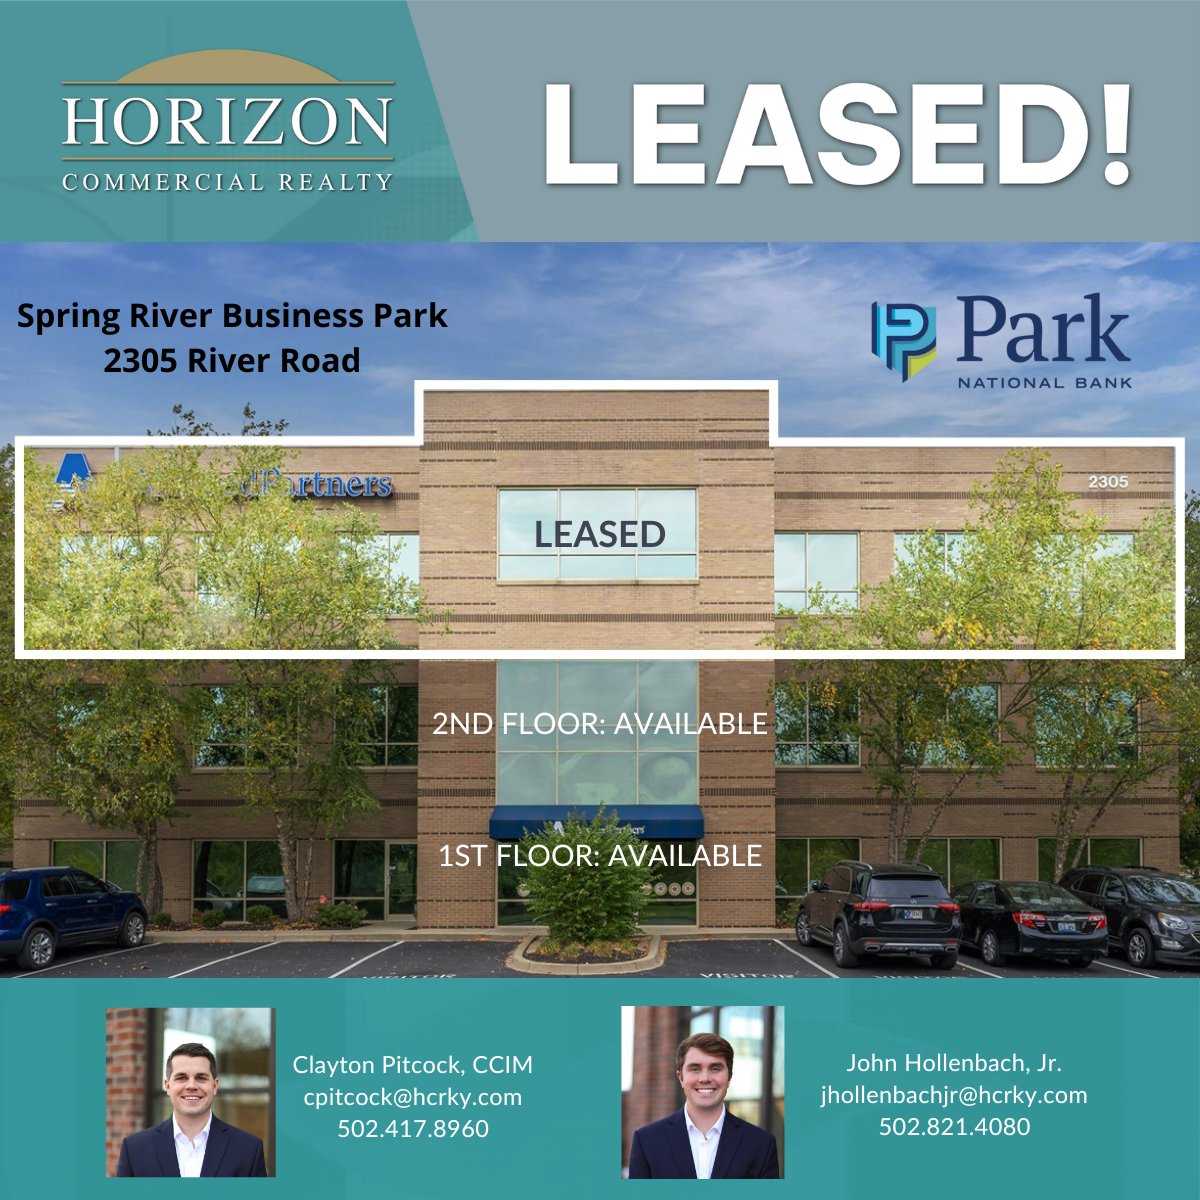 LEASED! Horizon welcomes Park National Bank to Spring River Business Park. Congrats to C. Pitcock, CCIM & J. Hollenbach, Jr. on securing this 11,415 SF long-term lease.

Need new office space? Connect with our team today! 📞 502.429.0090

#Leased #Office #CRE #LouisvilleKY